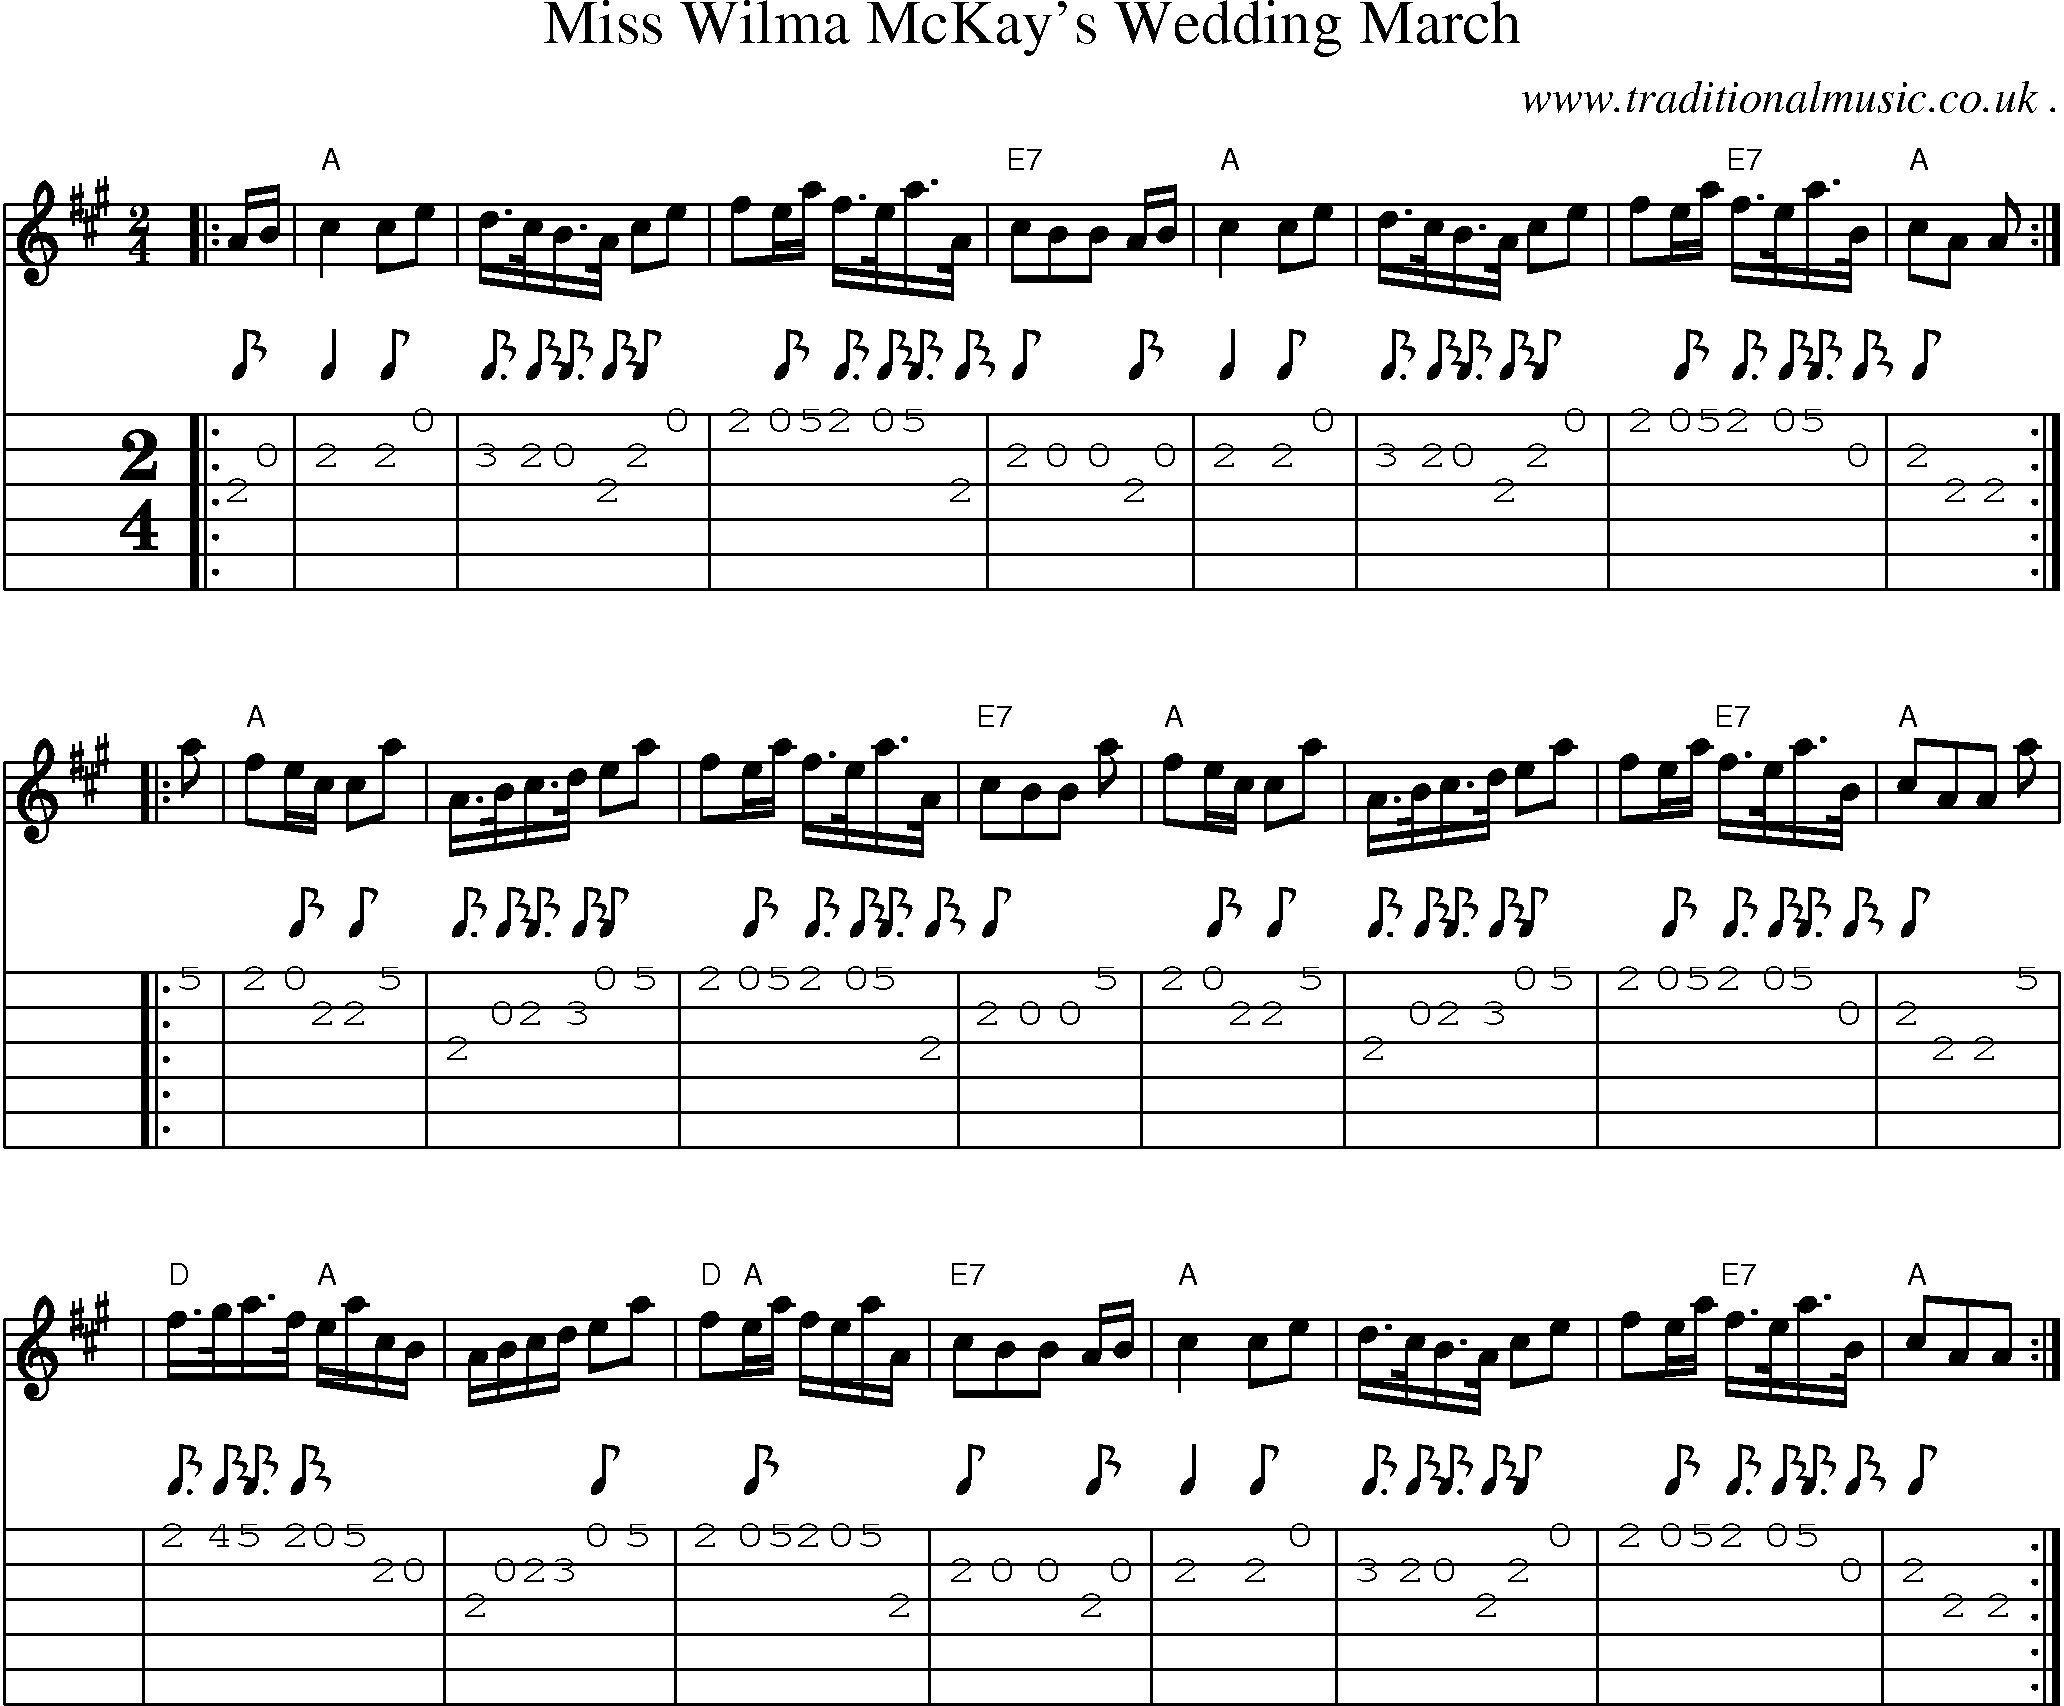 Sheet-music  score, Chords and Guitar Tabs for Miss Wilma Mckays Wedding March